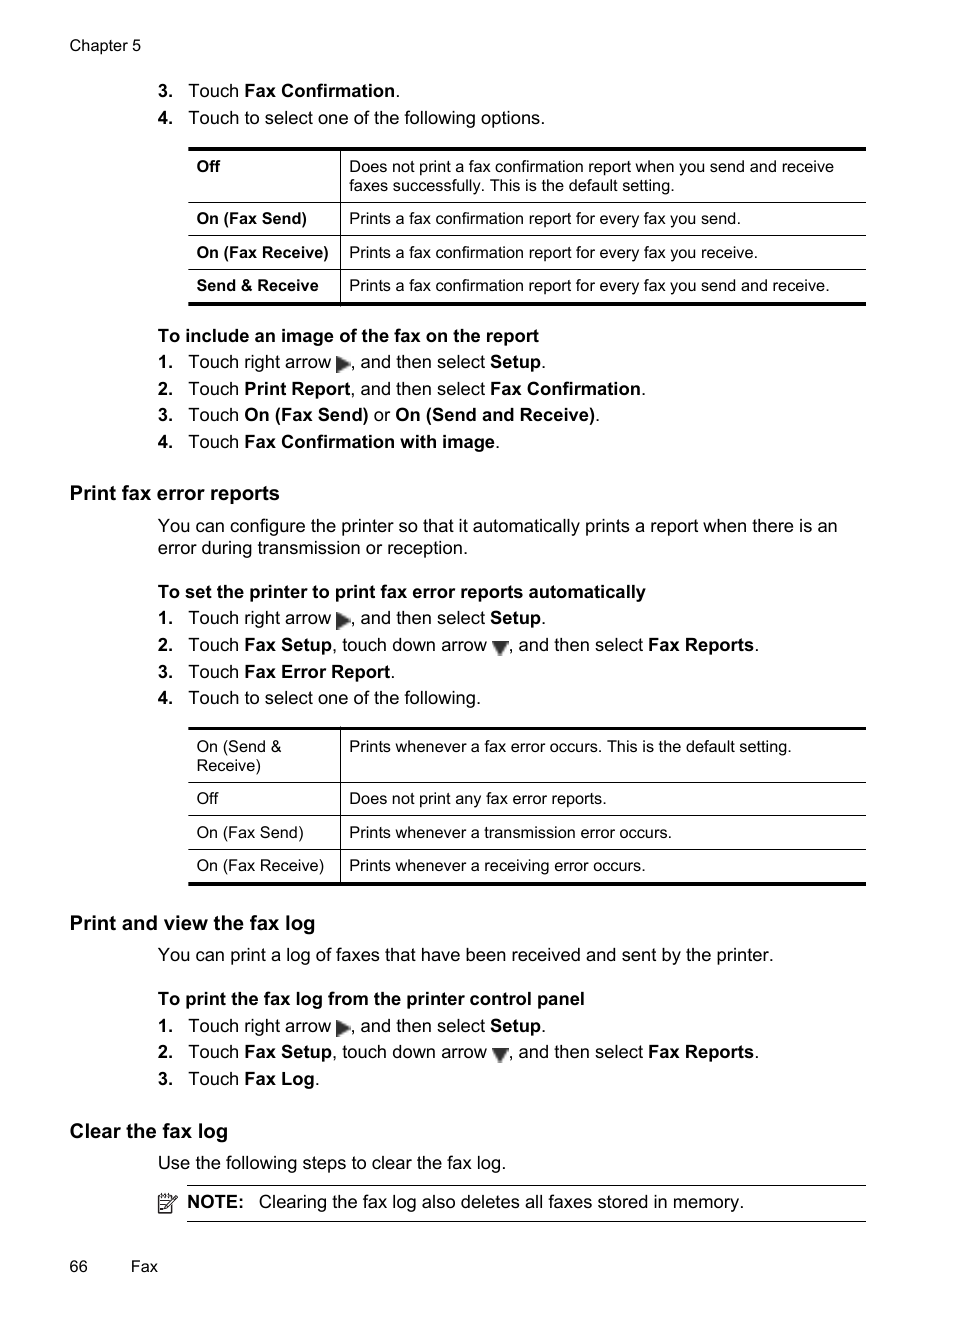 Print fax error reports, Print and view the fax log, Clear the fax log